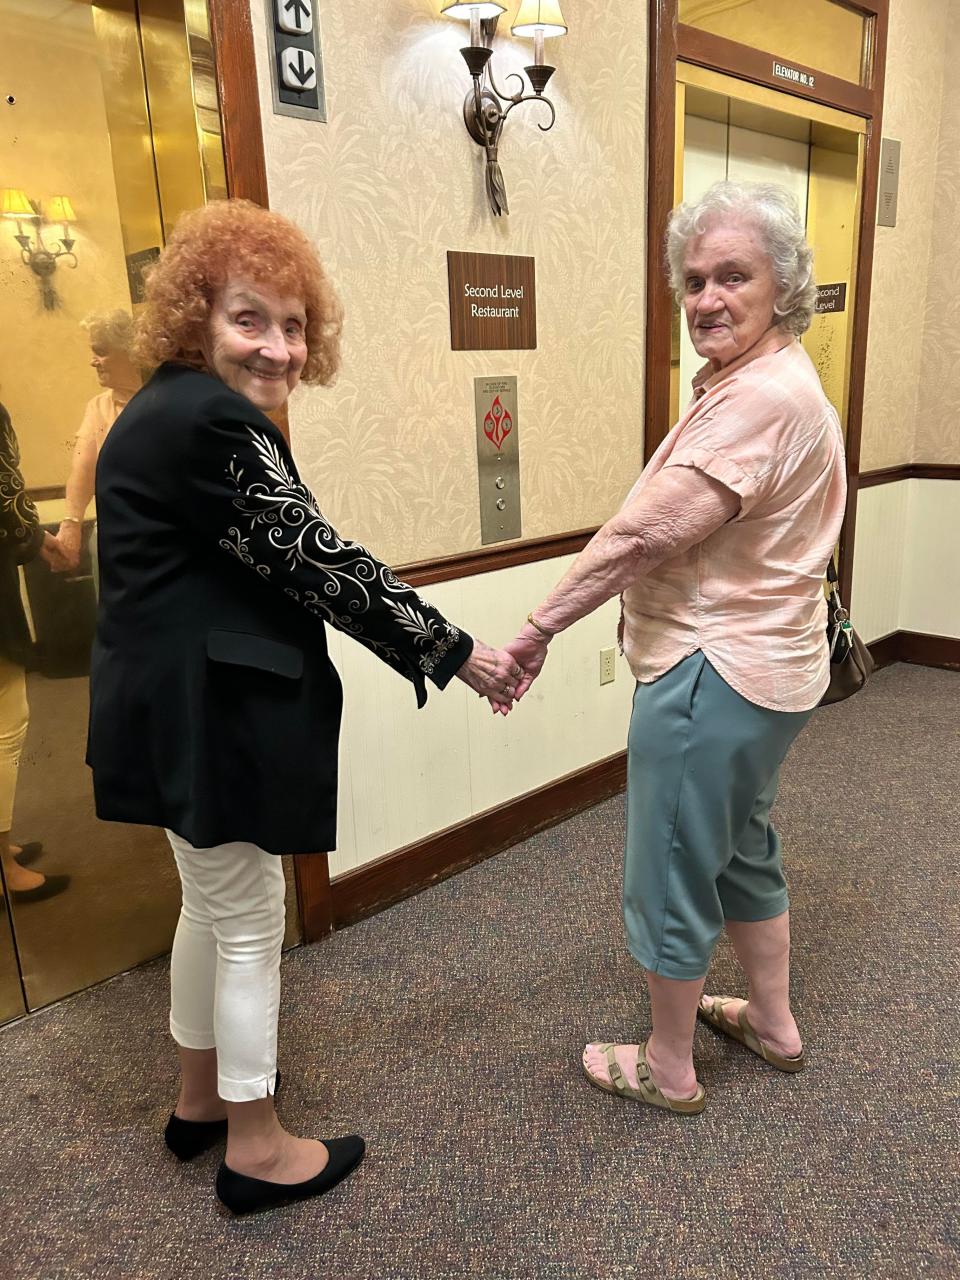 Barbara Carolan, 94, recently flew across the country to reunite with her 91-year-old sister Shirley. Carolan's granddaughter captured the reunion on video and it has since gone viral.